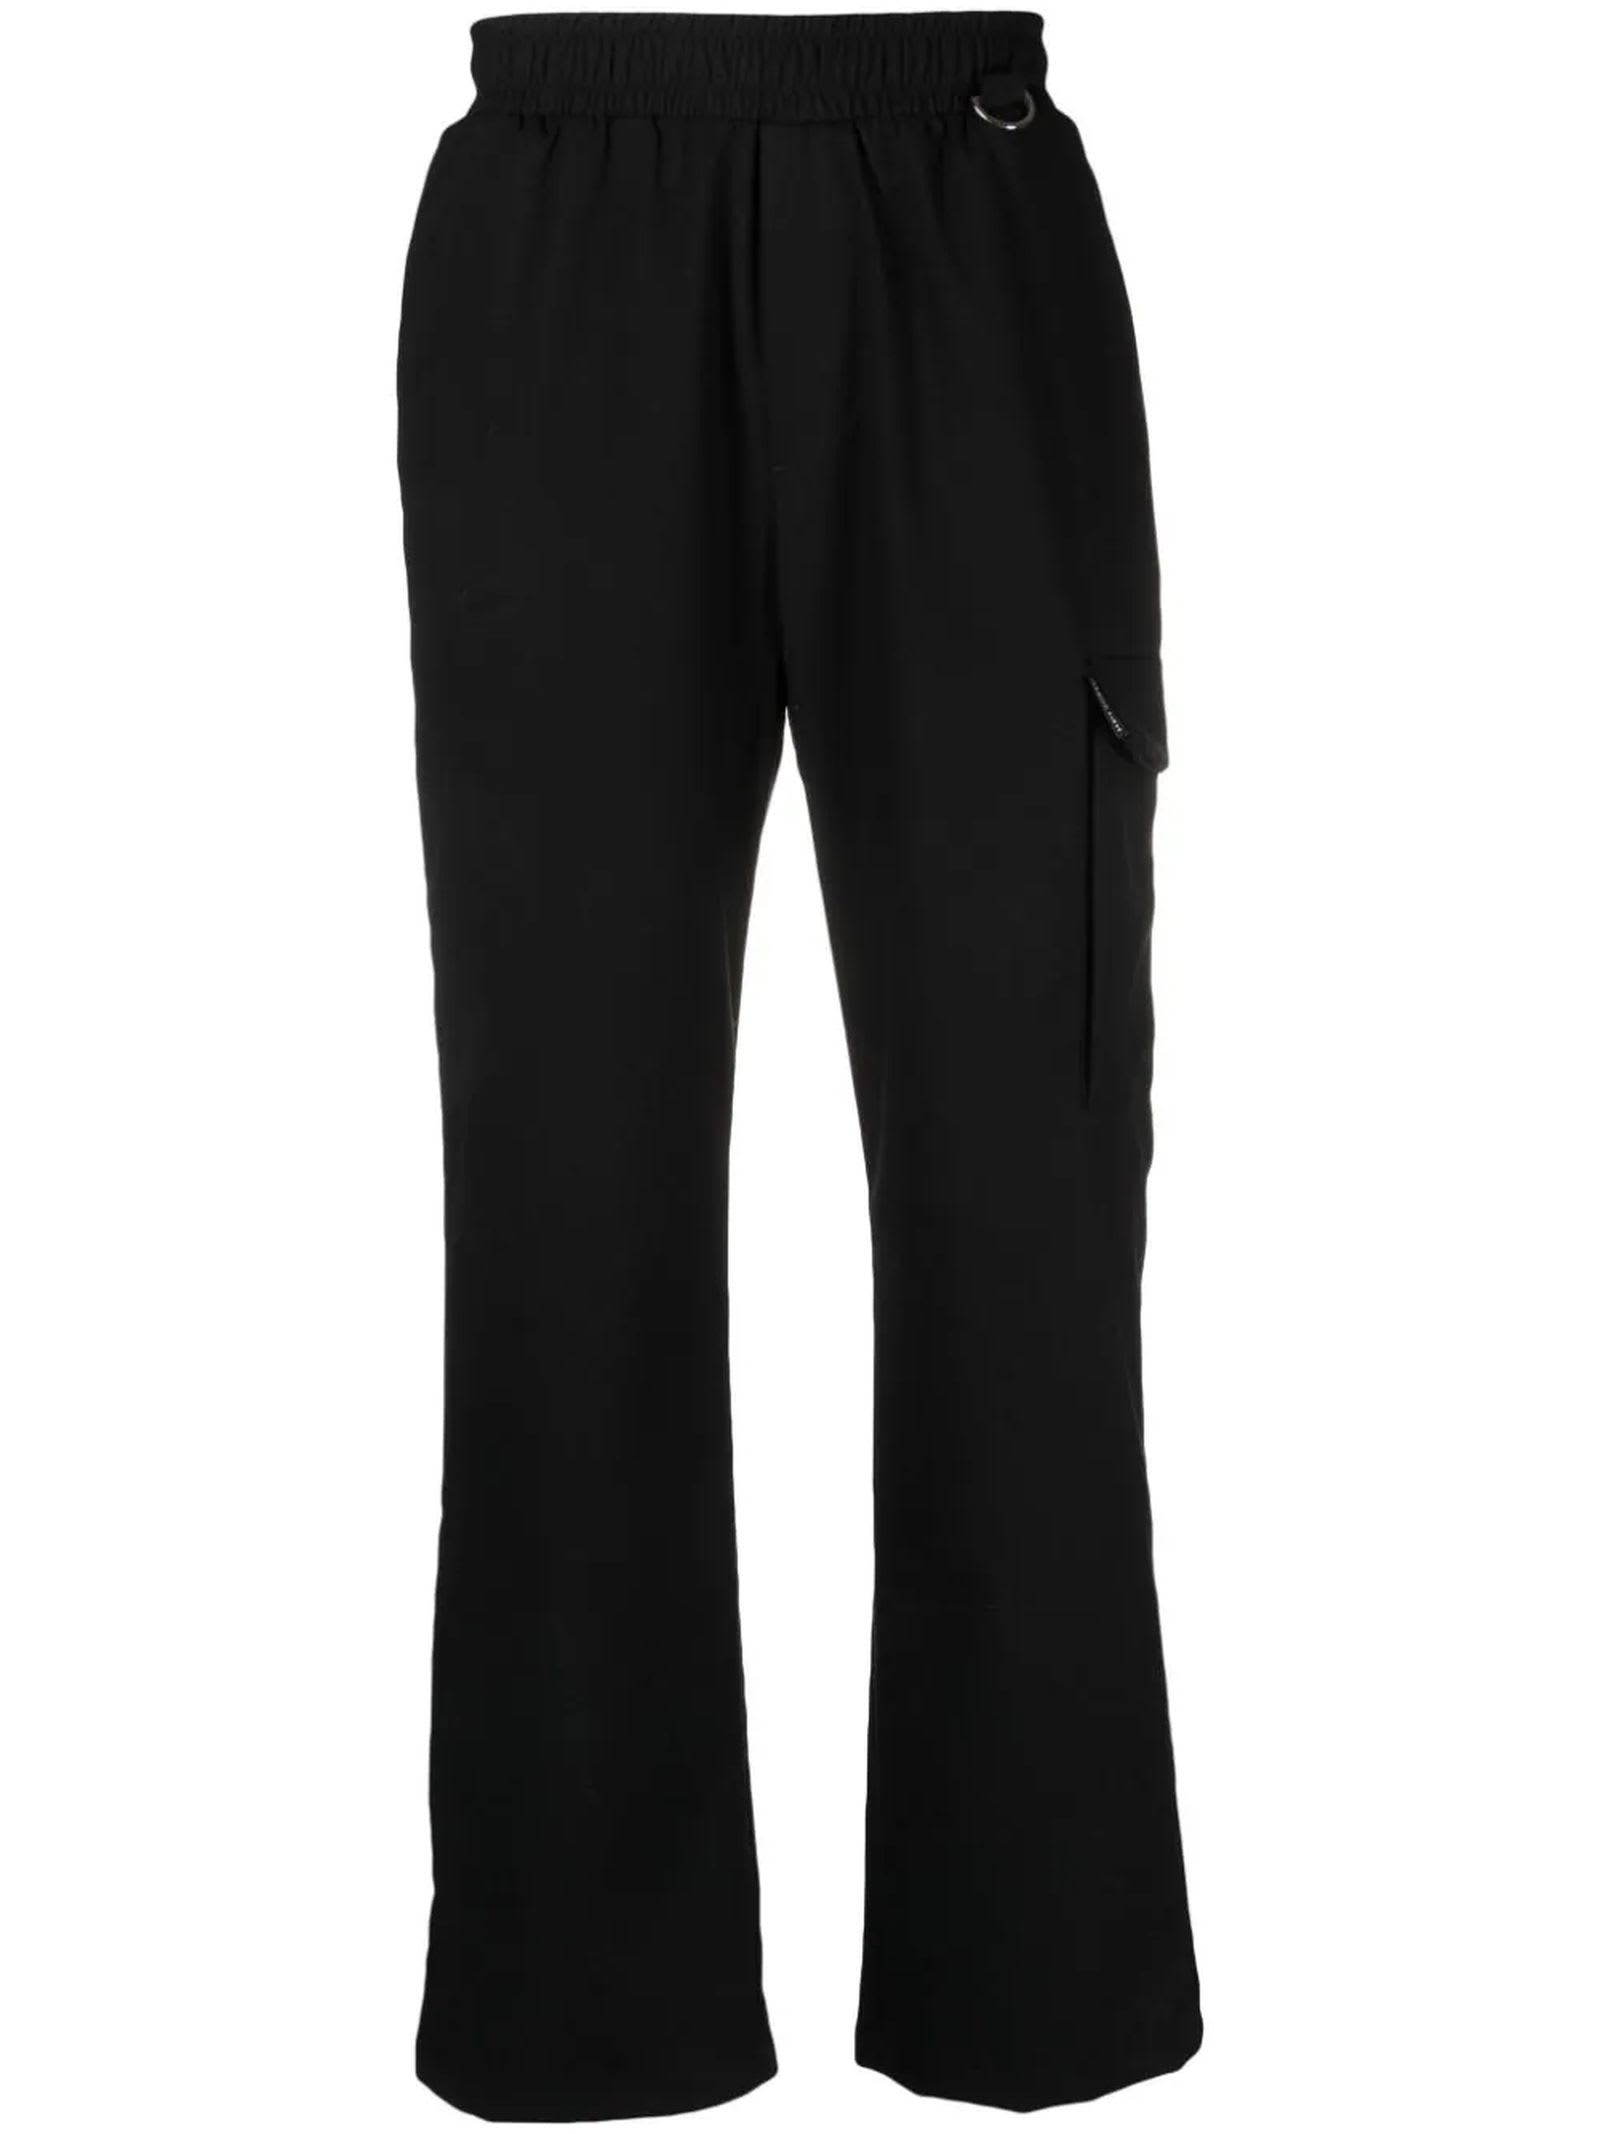 Shop Family First Milano Black Wool Blend Trousers